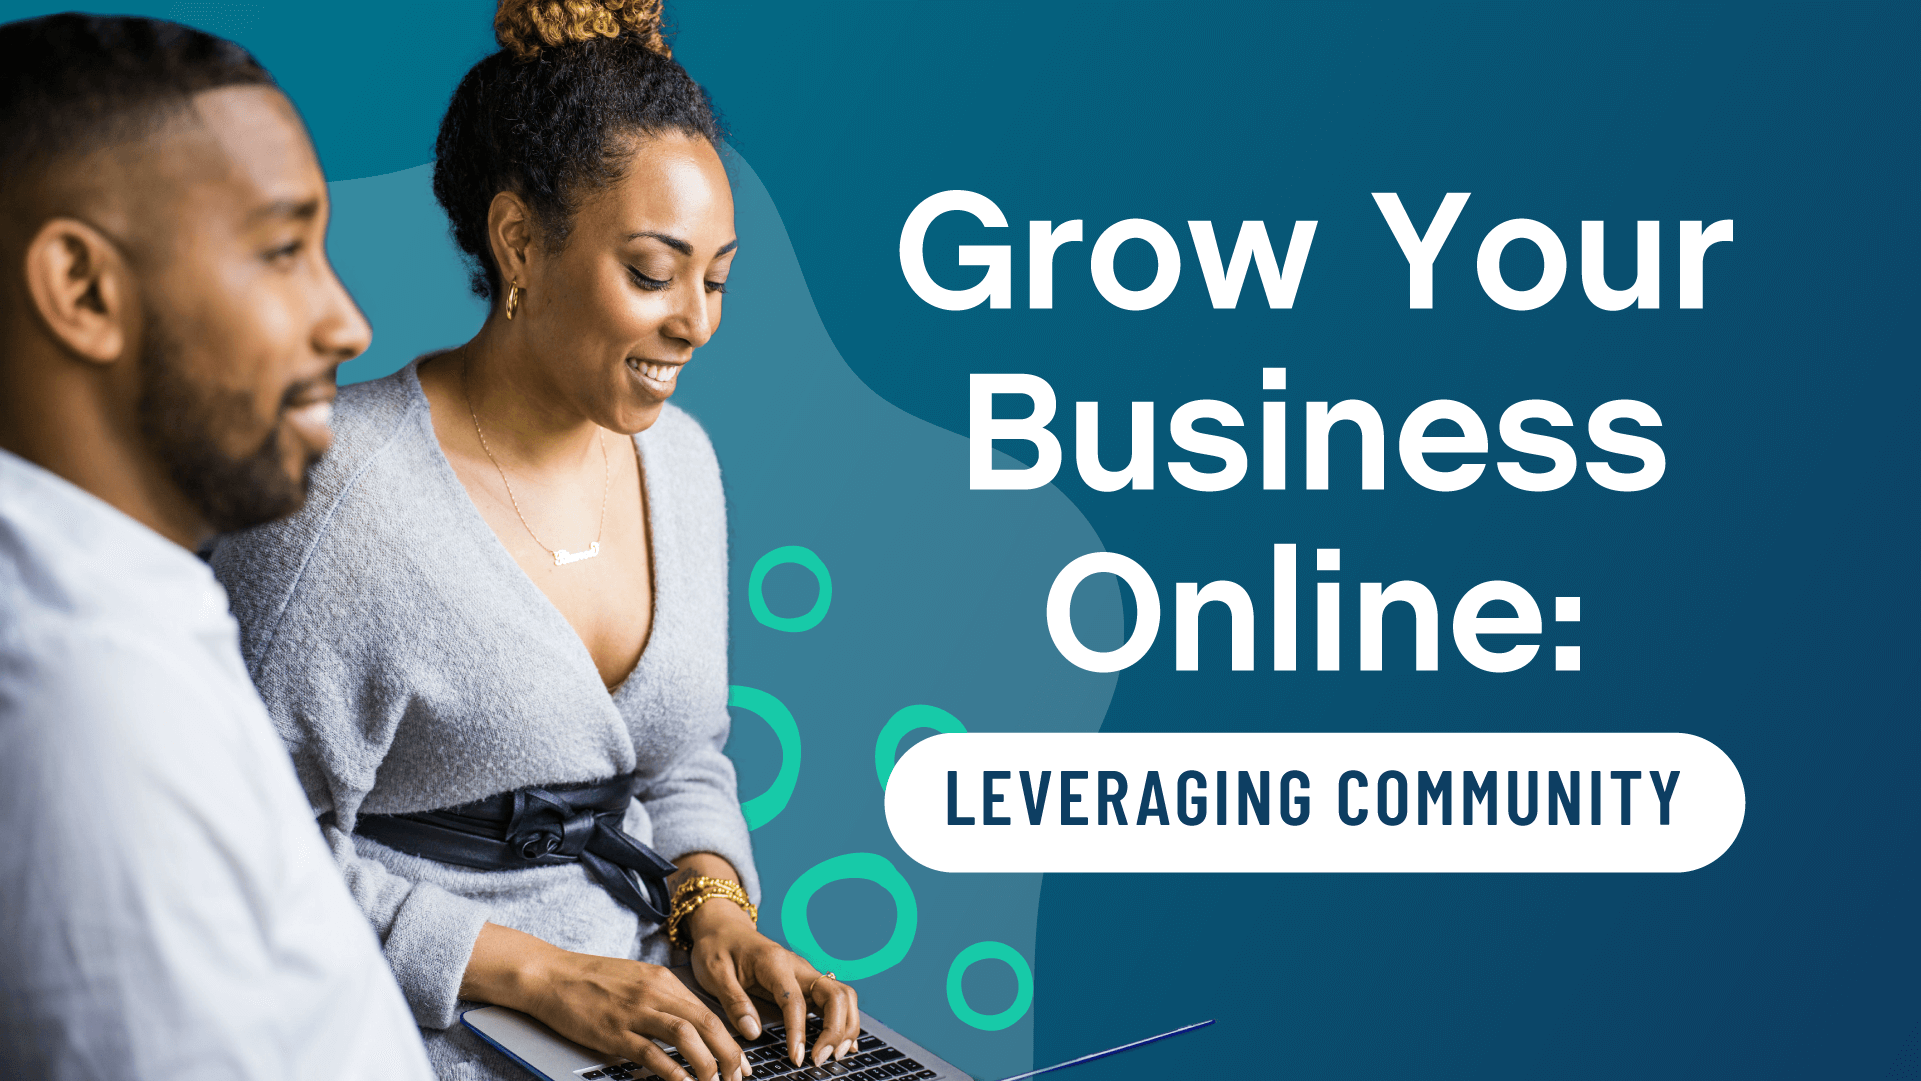 Grow Your Business Online: Leveraging Community